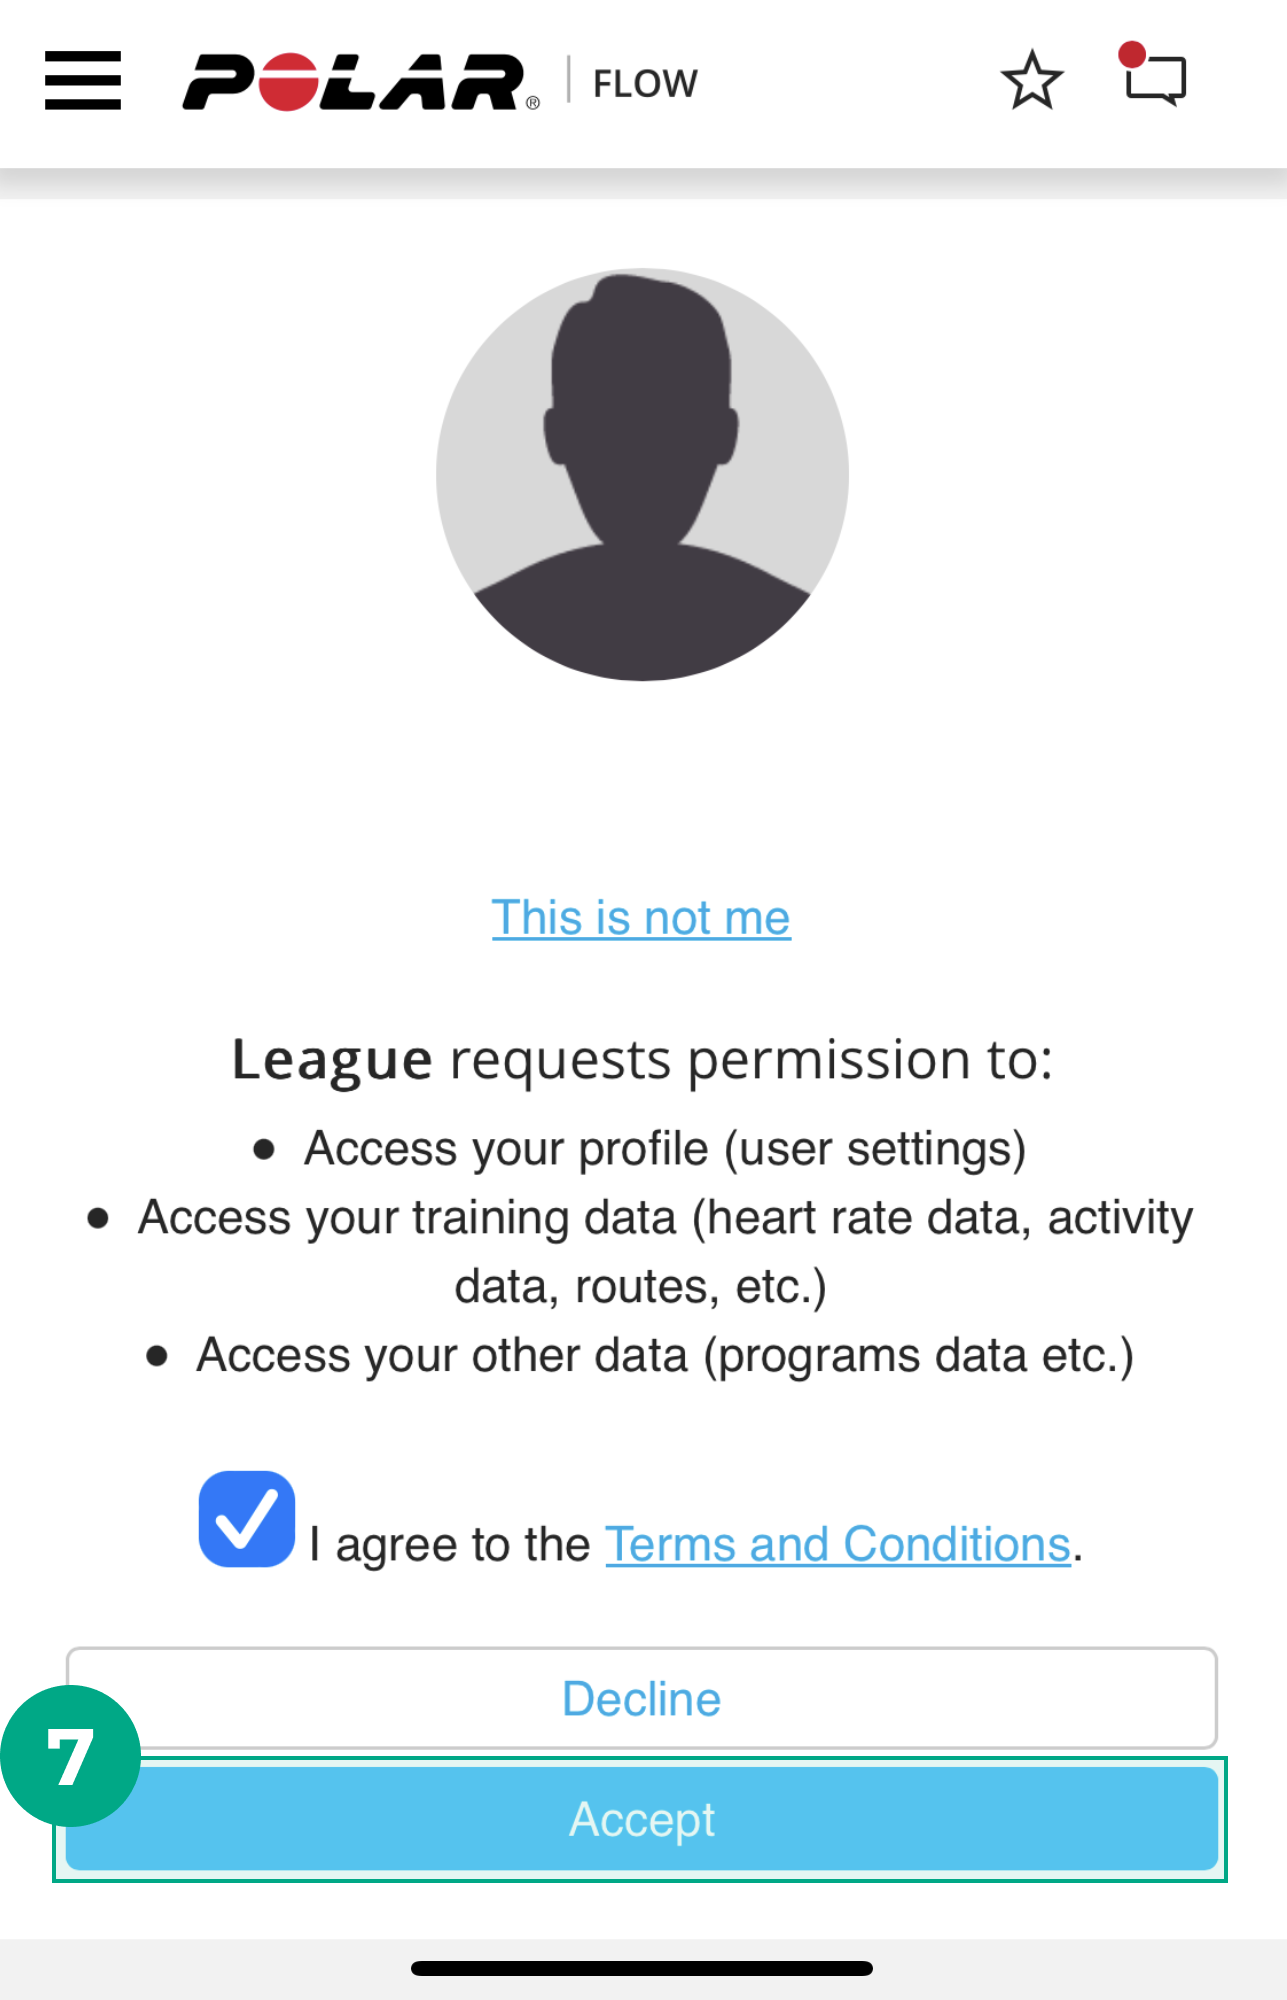 polar app permission request button with accept button highlighted